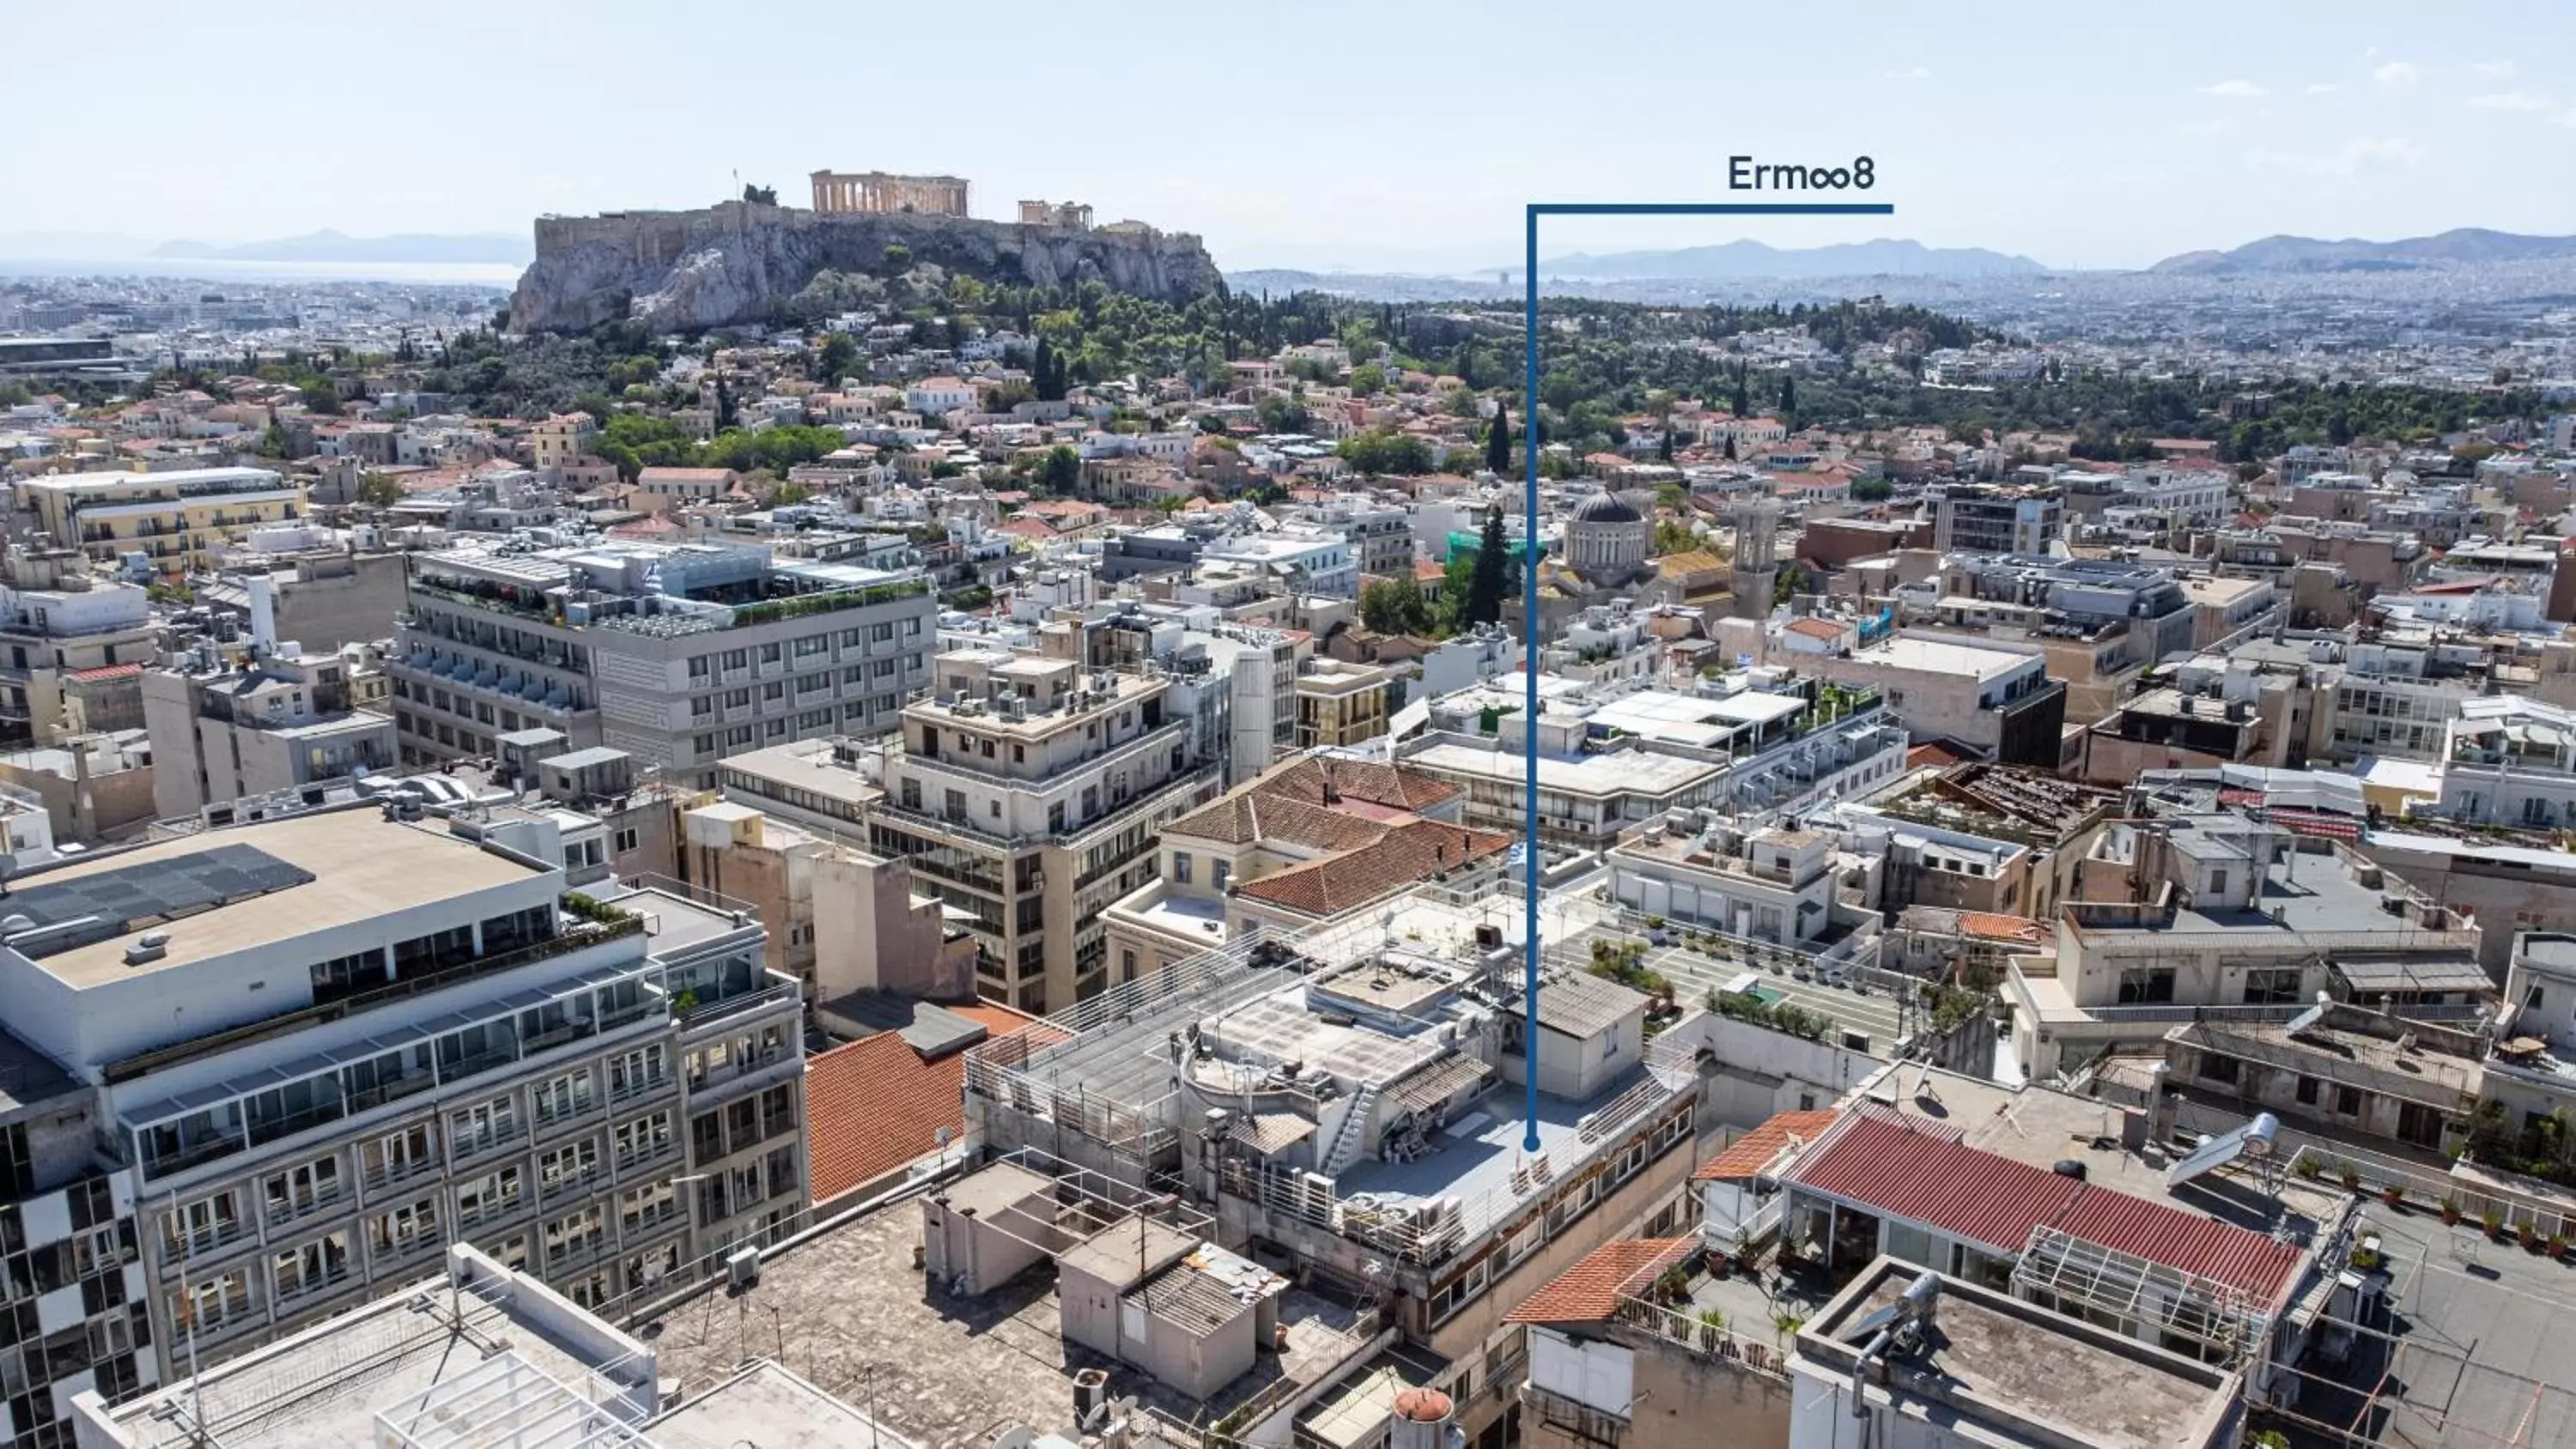 Location, Bird's-eye View in Ermoo Athens Modern Living